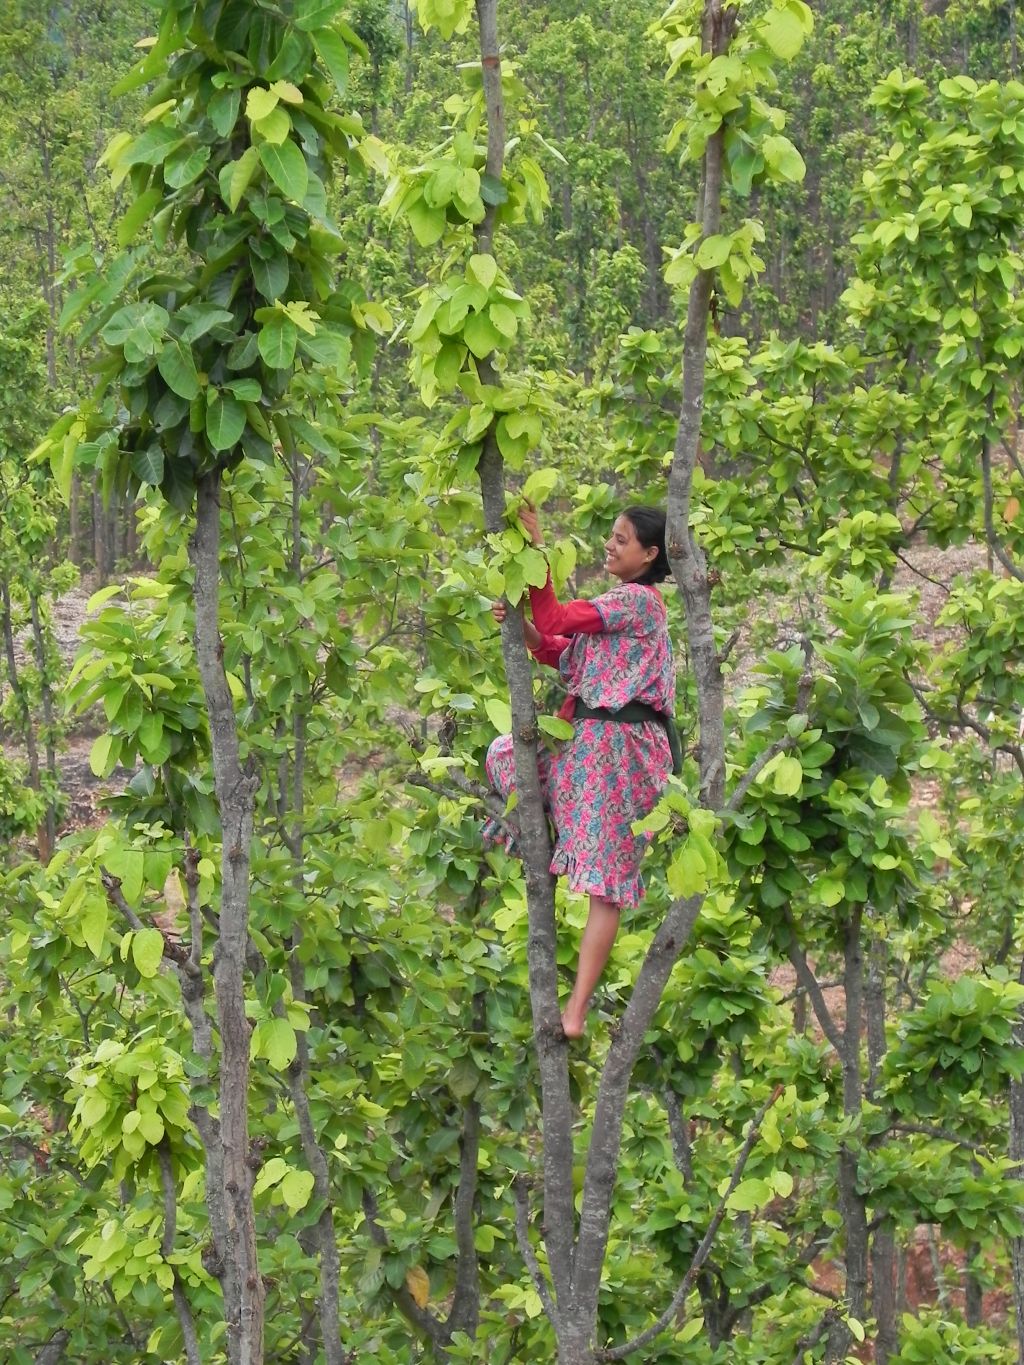 Making forestry work for women